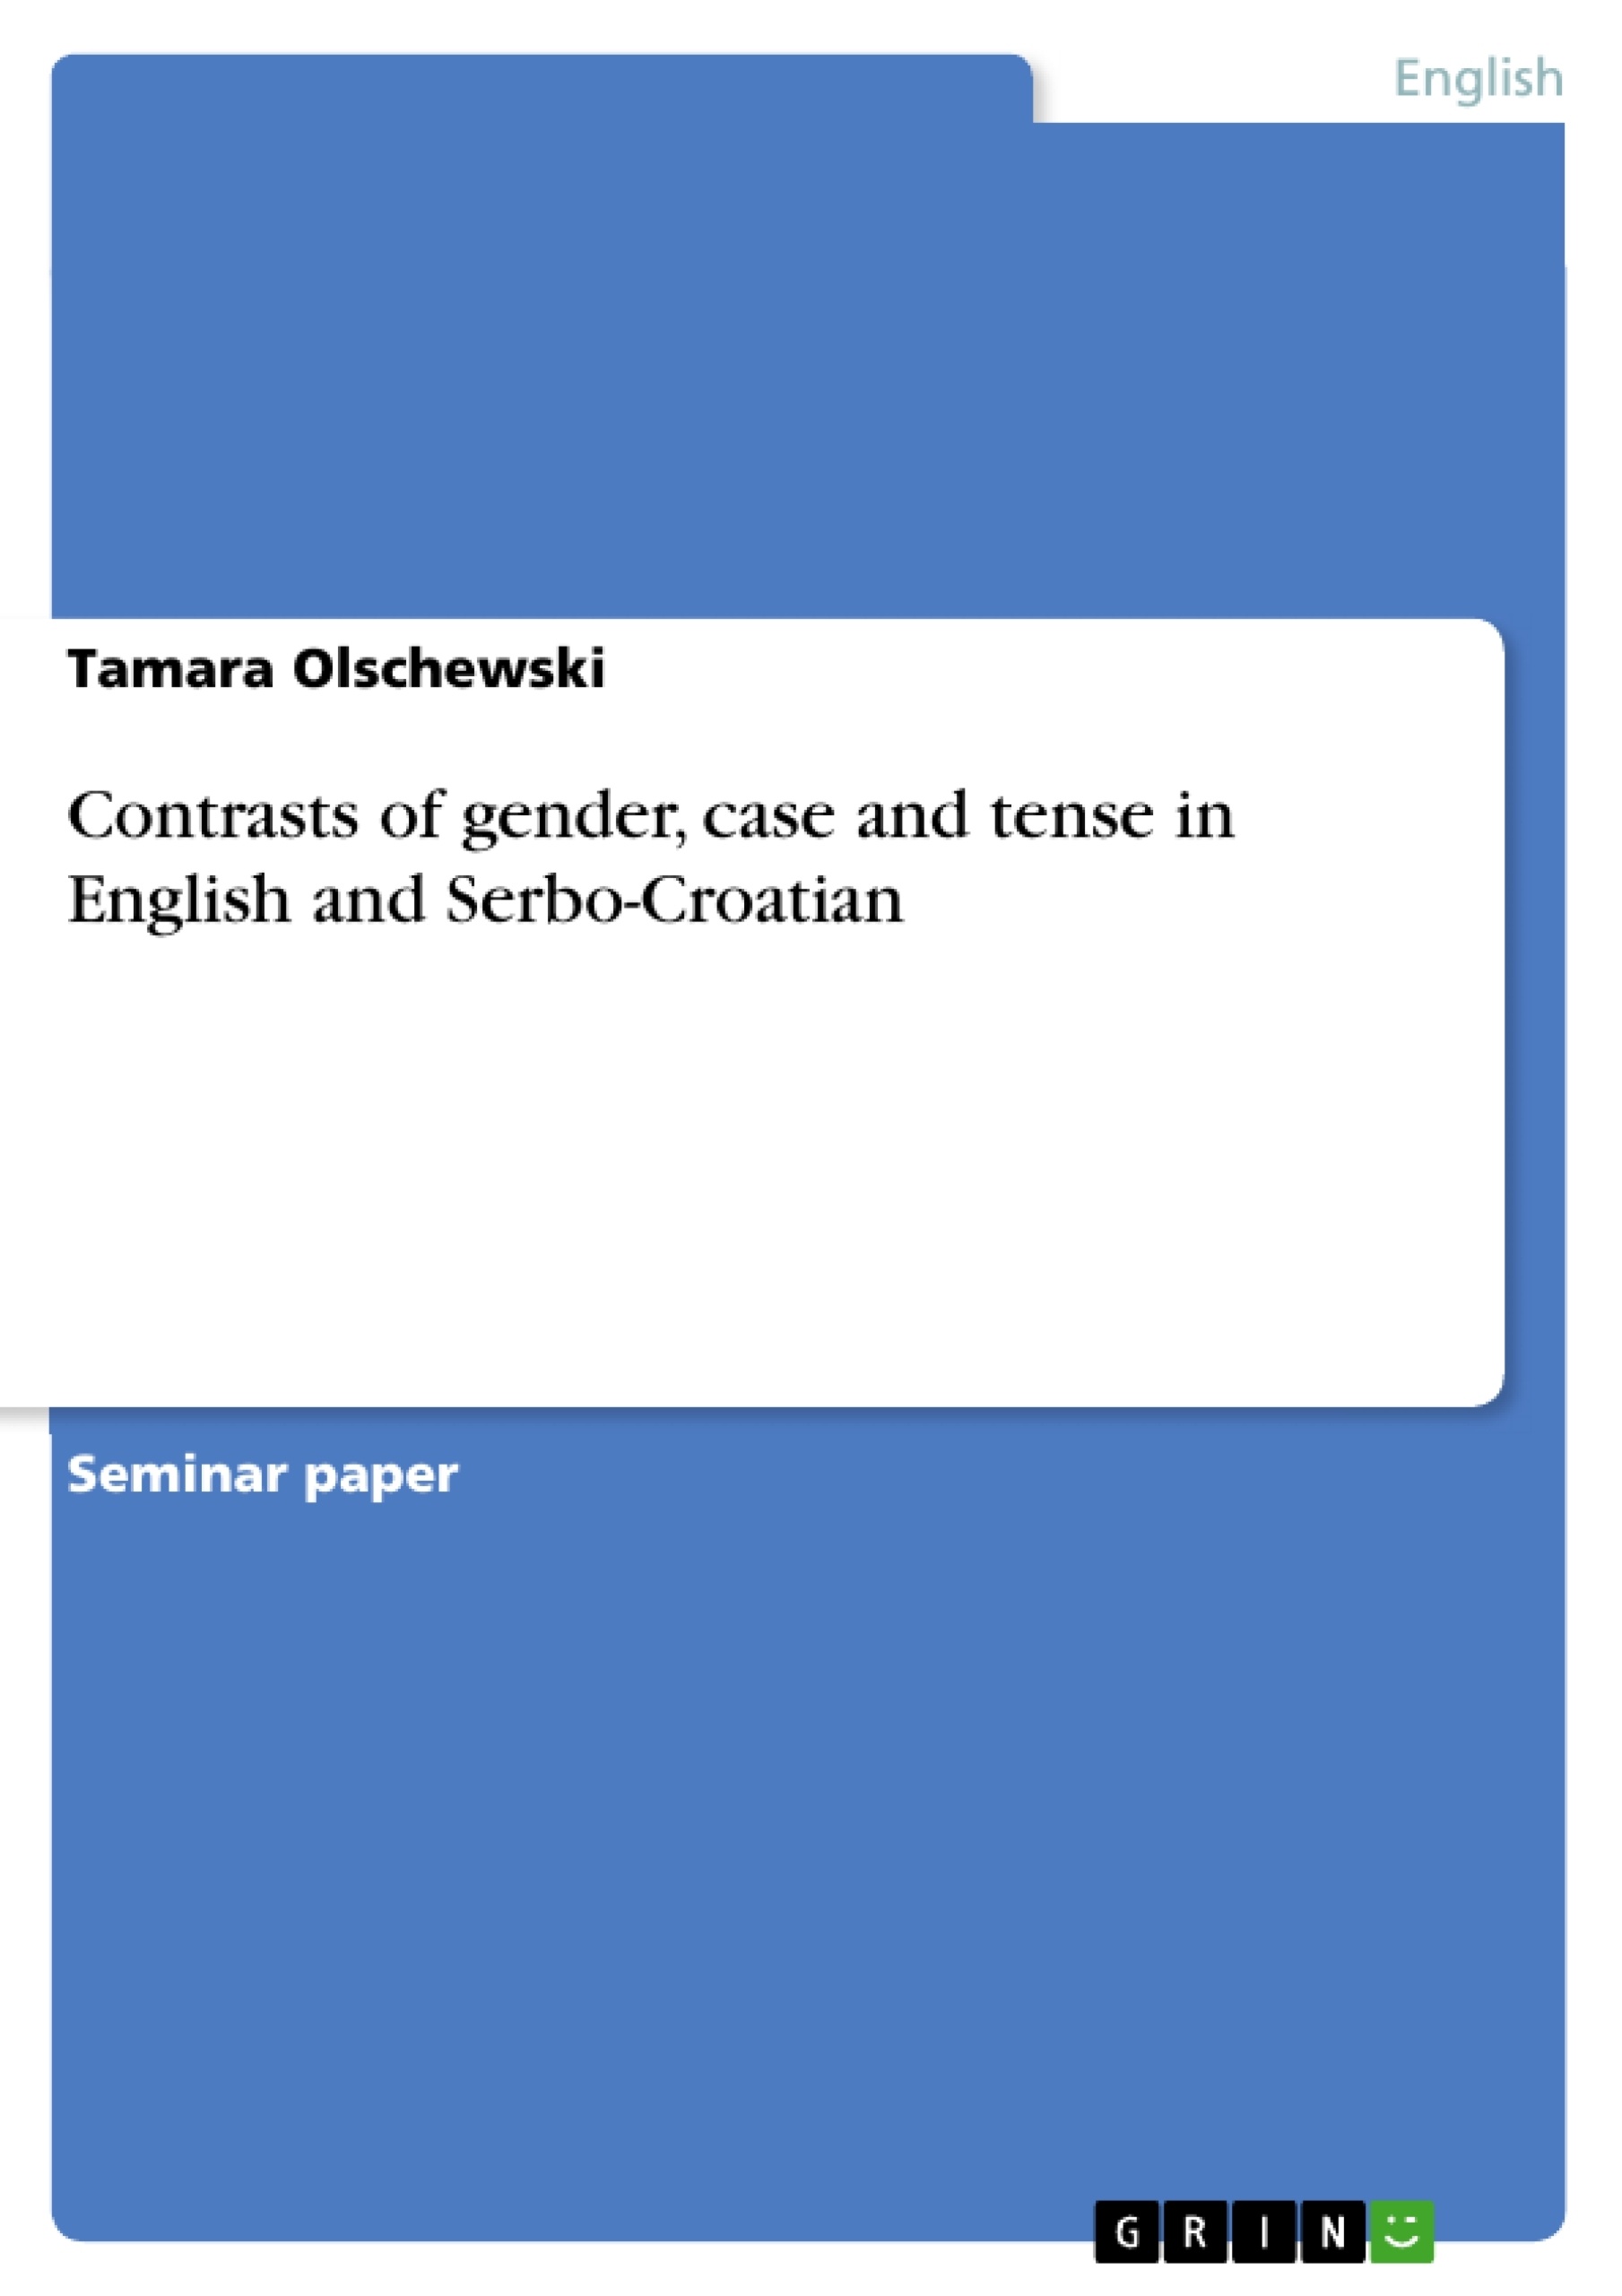 Title: Contrasts of gender, case and tense in English and Serbo-Croatian